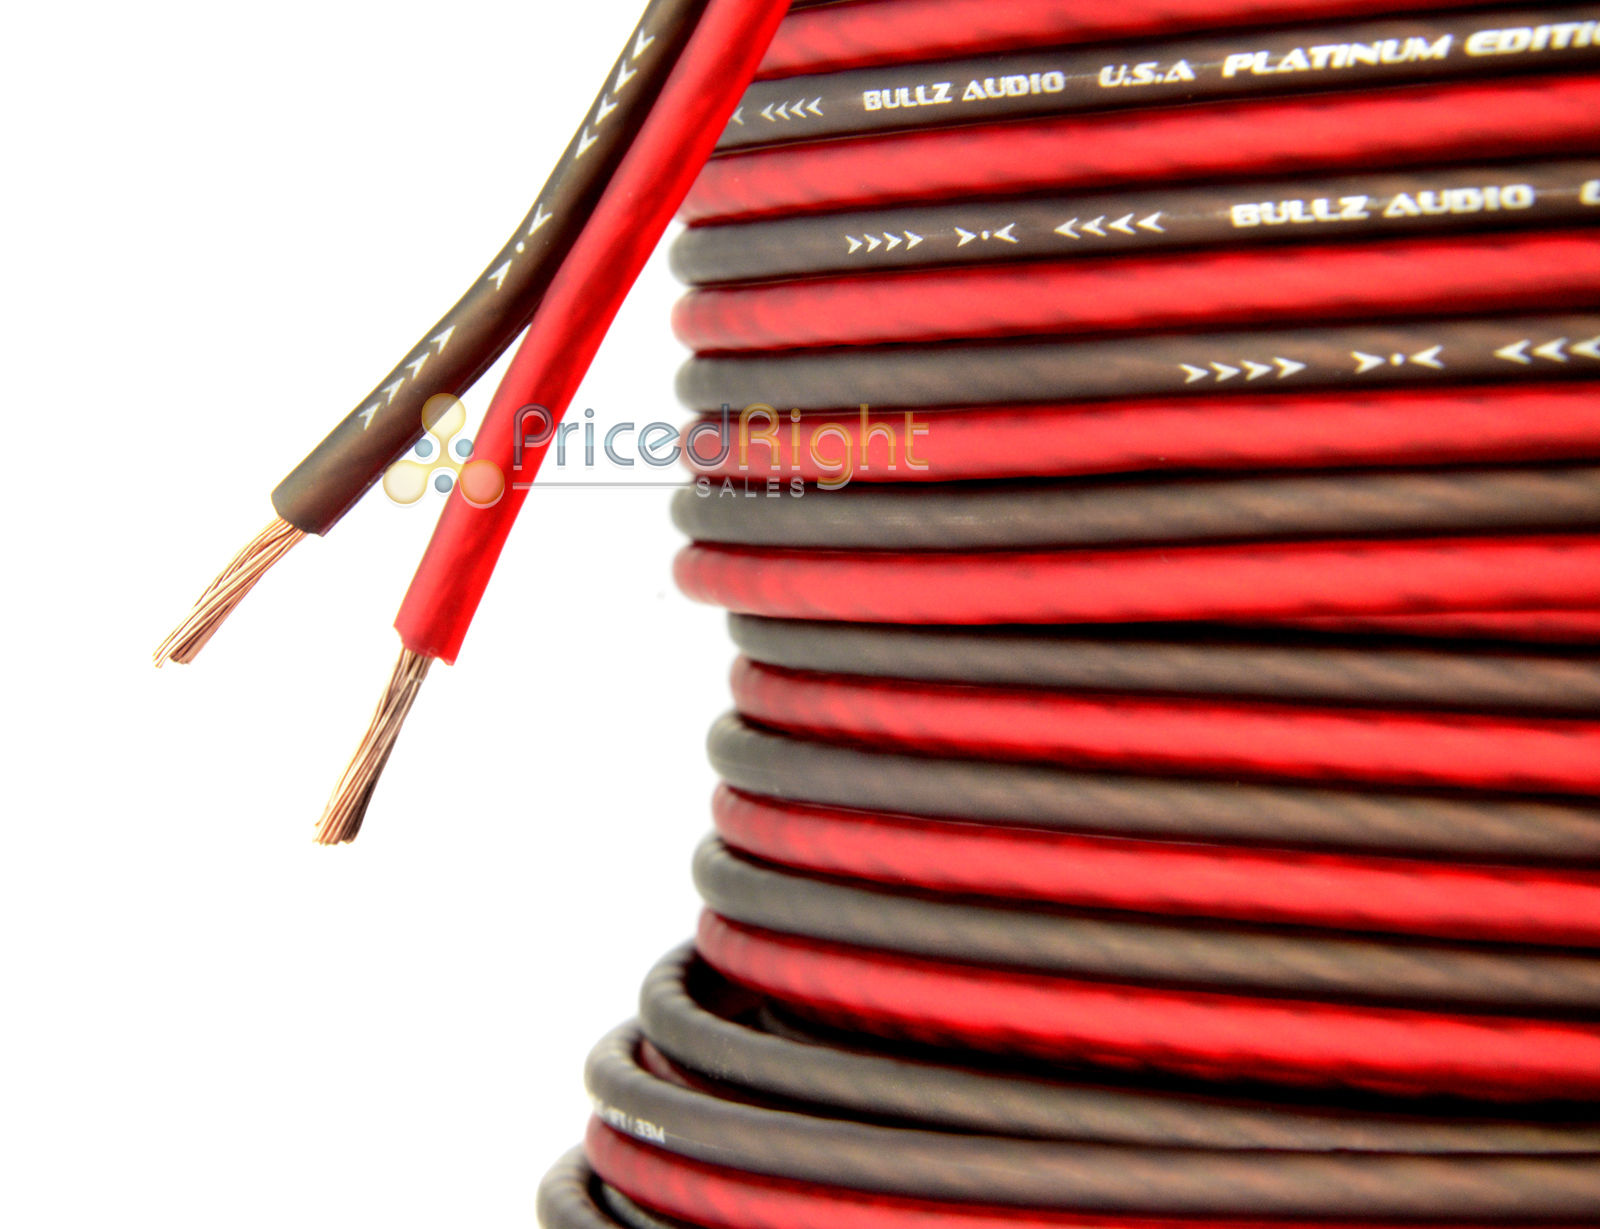 50 Ft 14 Gauge Speaker Wire Professional Zip Cable Car Home Audio Flexible AWG